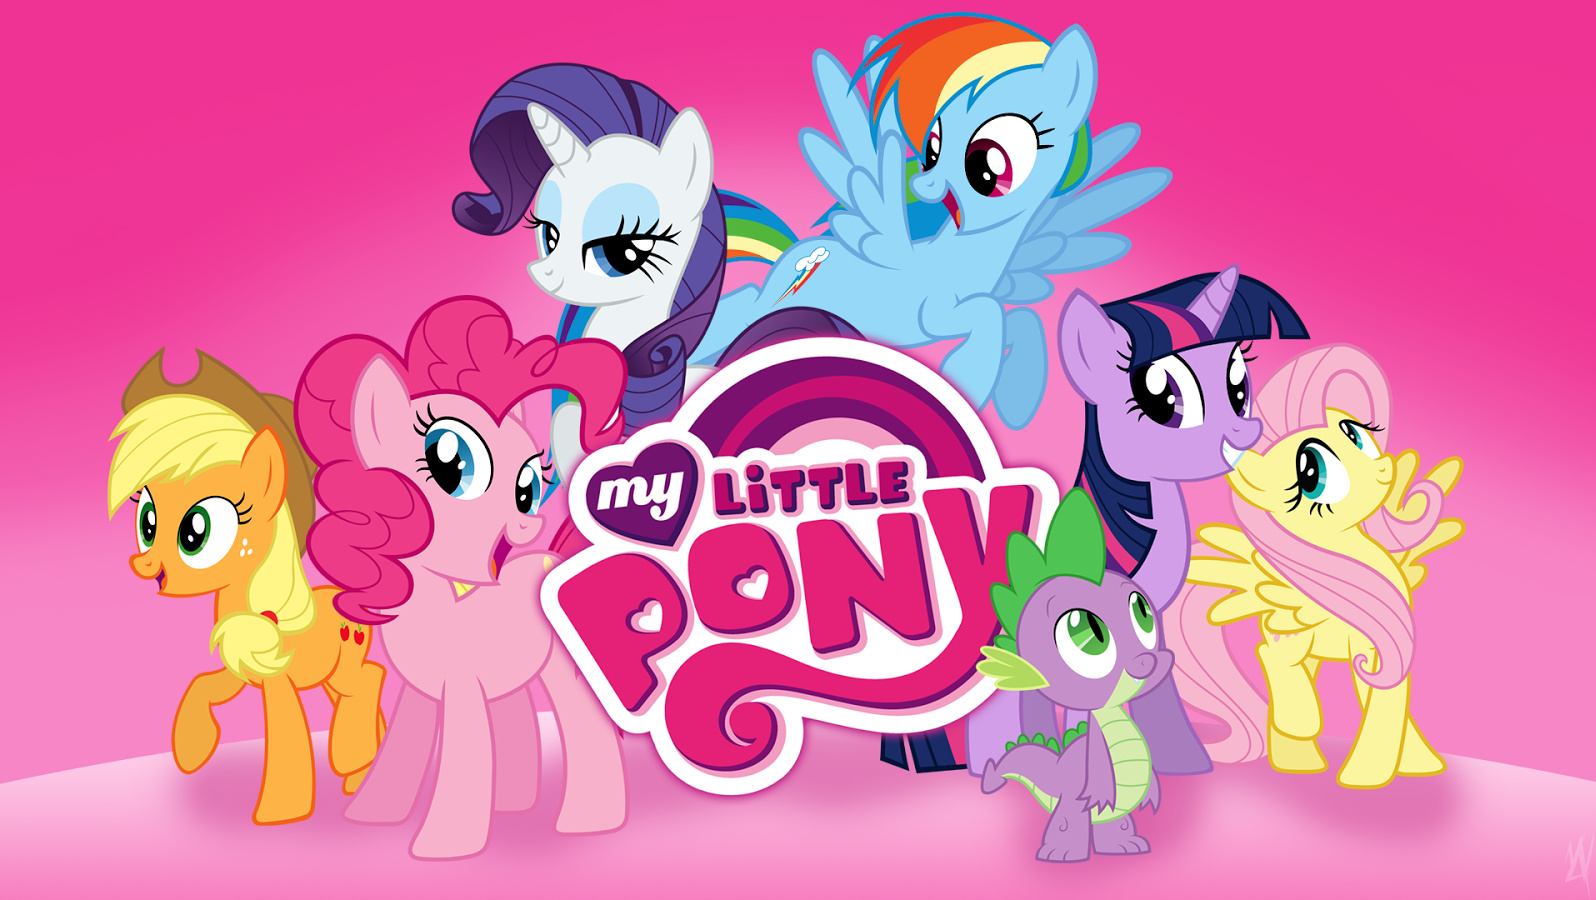 http://media.moddb.com/images/groups/1/7/6284/my-little-pony-friendship-is-mag.jpg